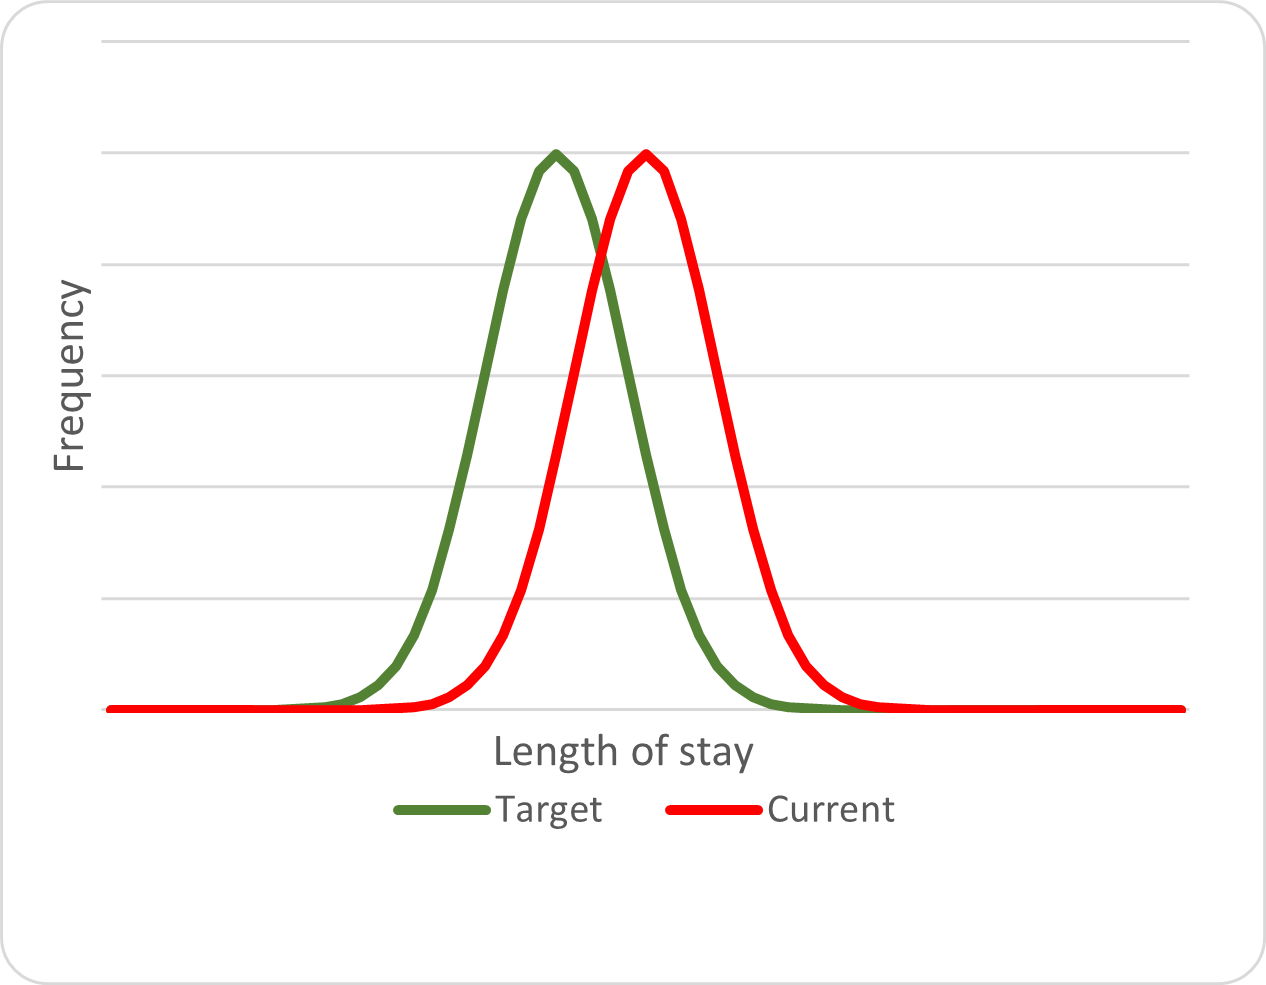 This graph shows the management impact of Activity Based Funding with intent to reduce average length of stay. Length of stay can be a driver or proxy for cost.